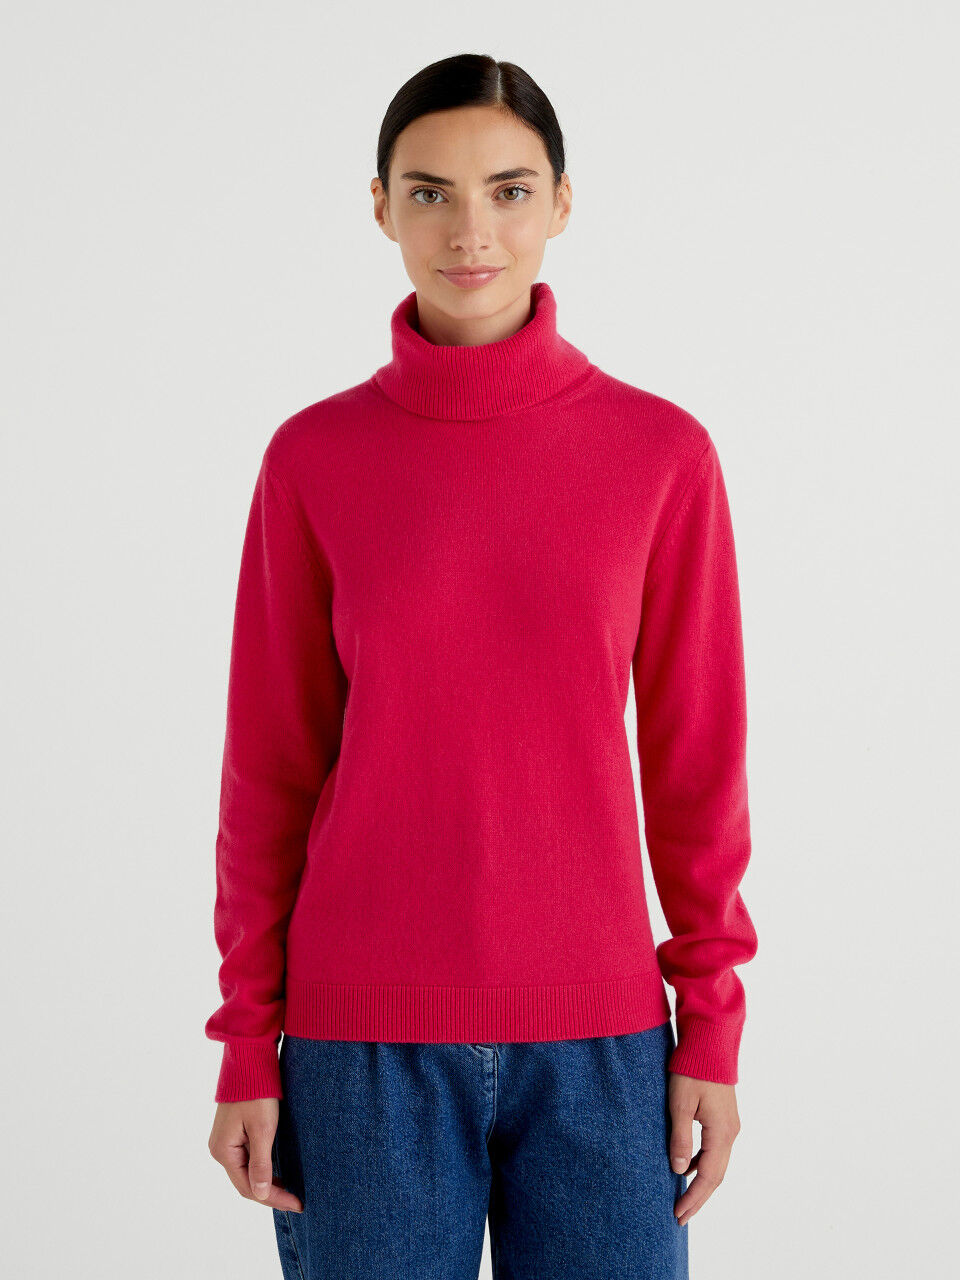 Women's Iconic Cashmere Knitwear Collection 2023 |